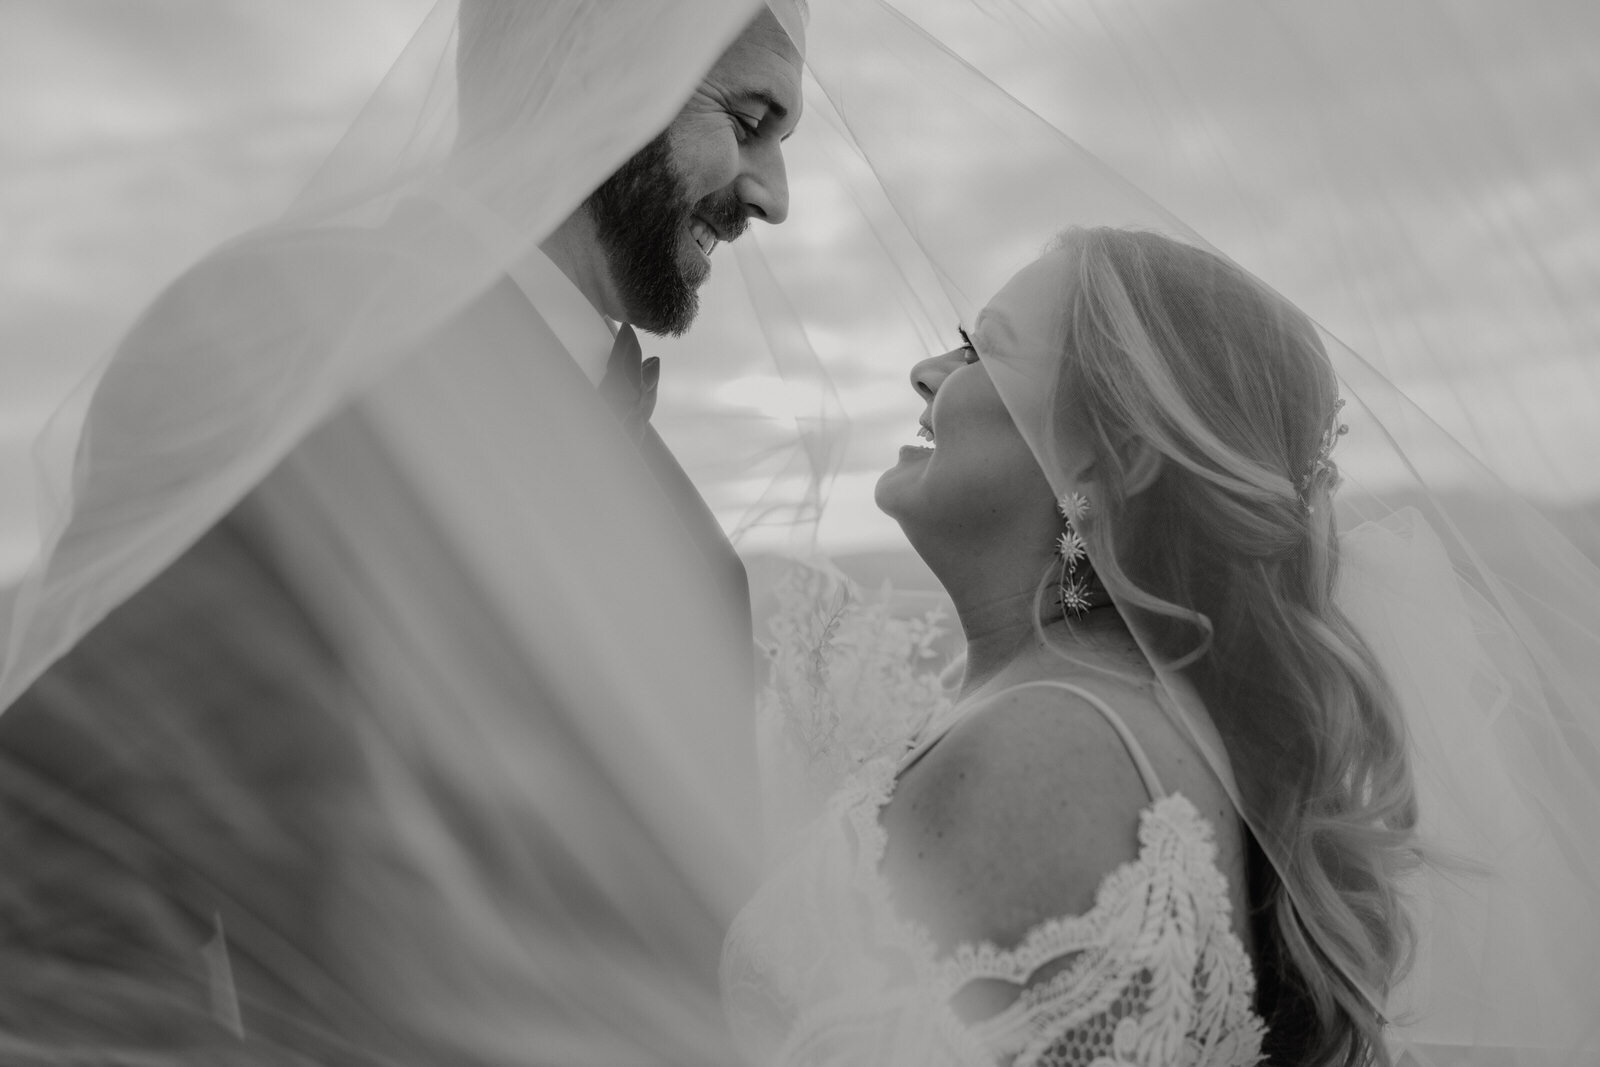 black and white artistic wedding photo of bride and groom under veil in desert